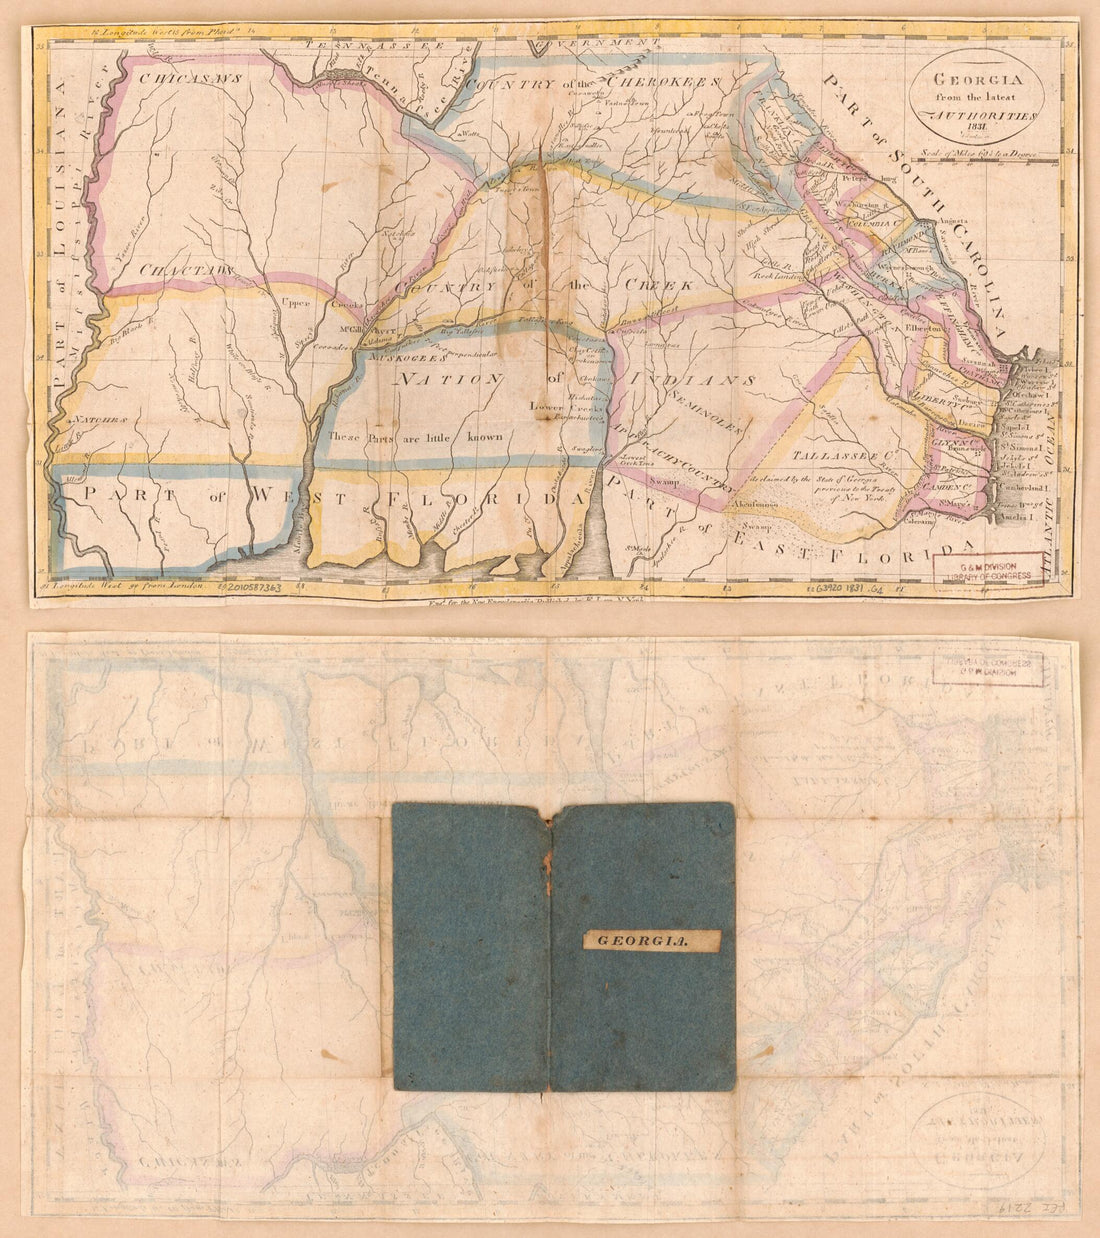 This old map of Georgia, from the Latest Authorities from 1831 was created by Esther Prentiss Low in 1831